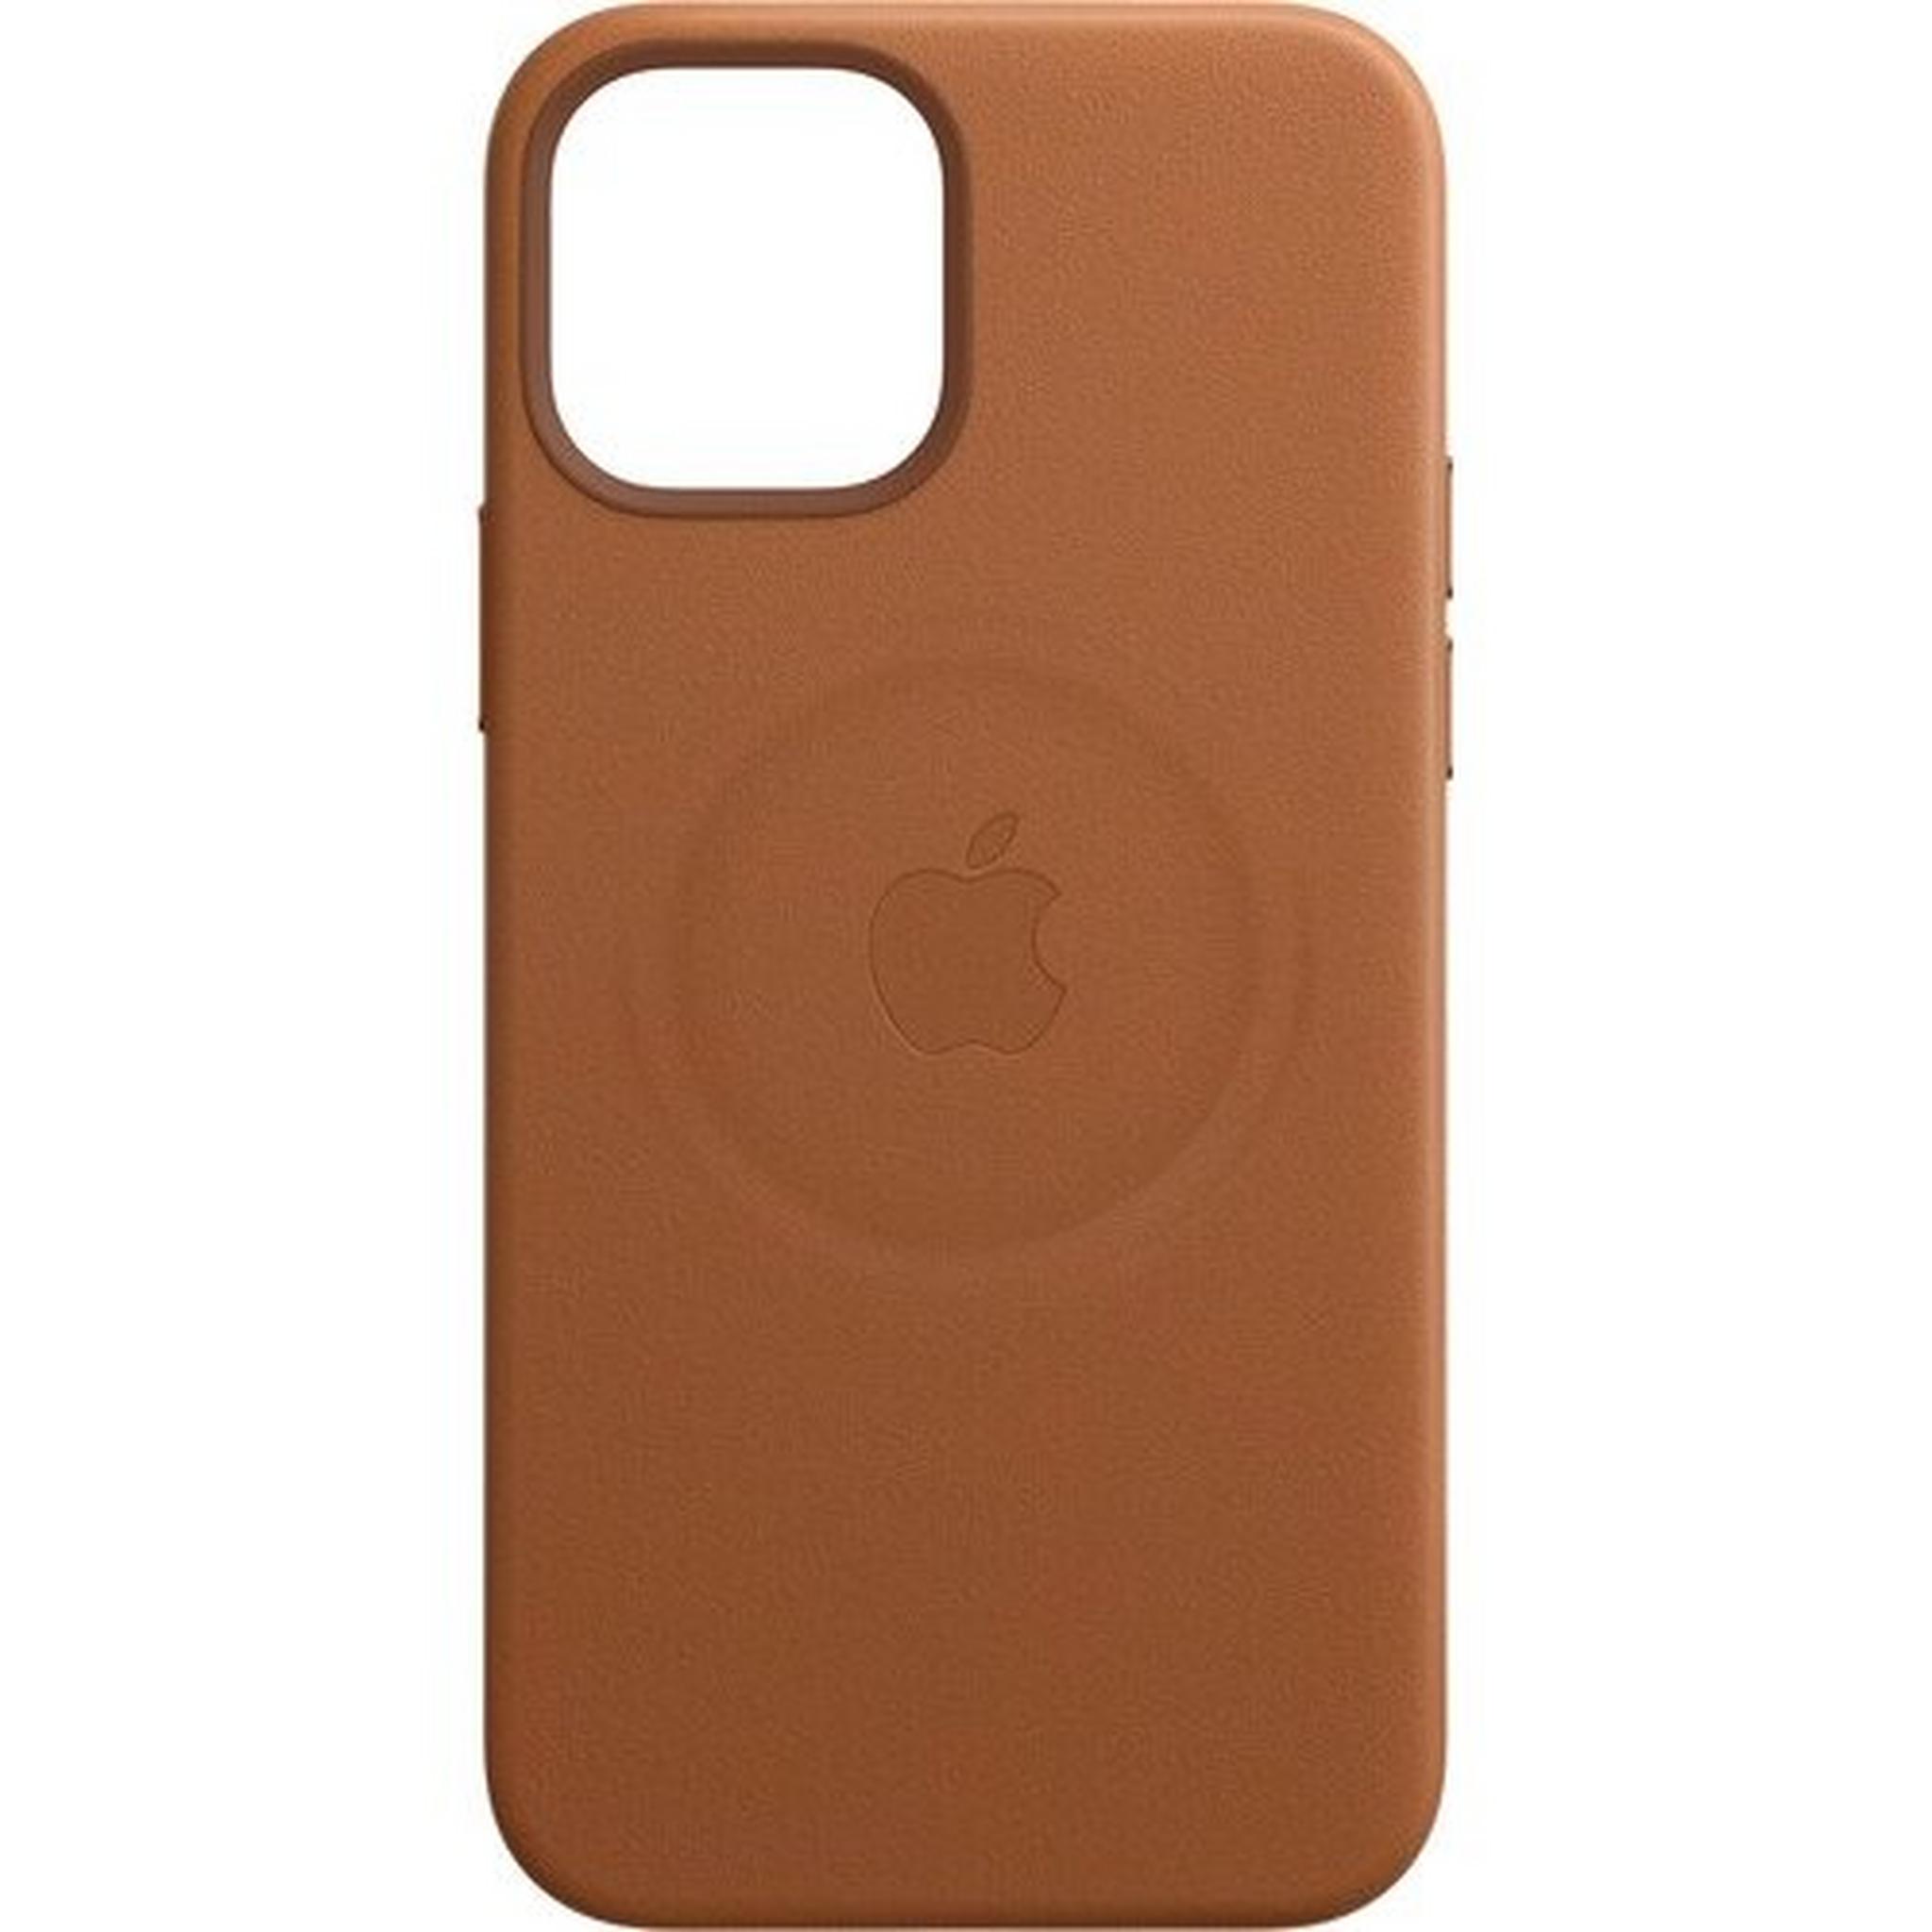 Apple iPhone 12 mini  Leather Case with MagSafe - Saddle Brown